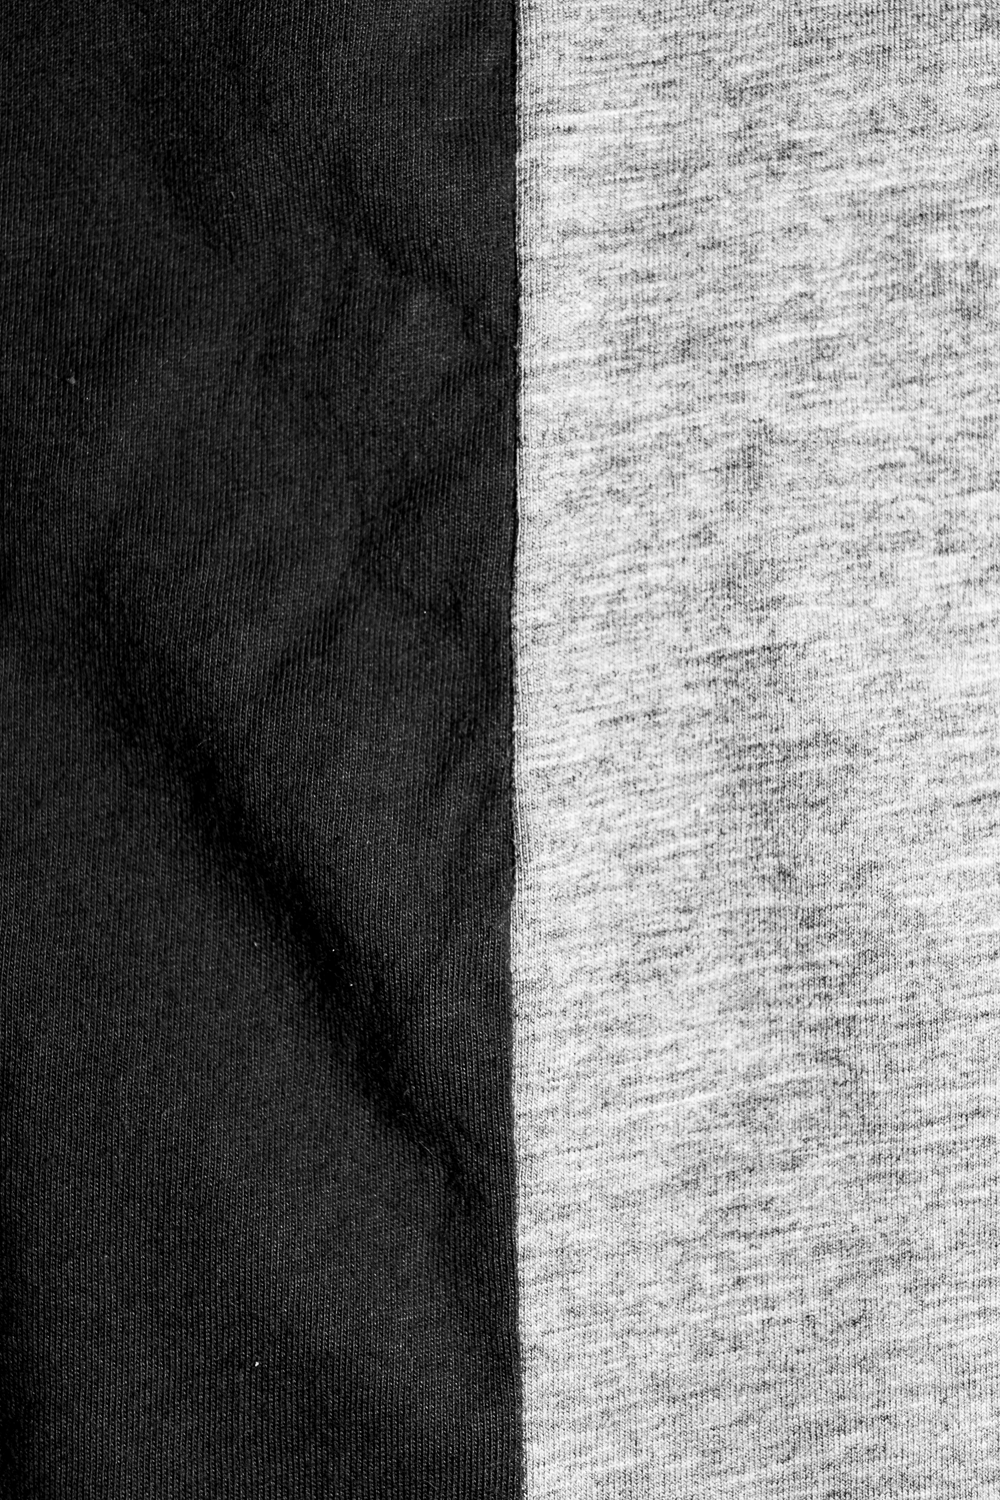 Black and white macro image of two-toned textile. 